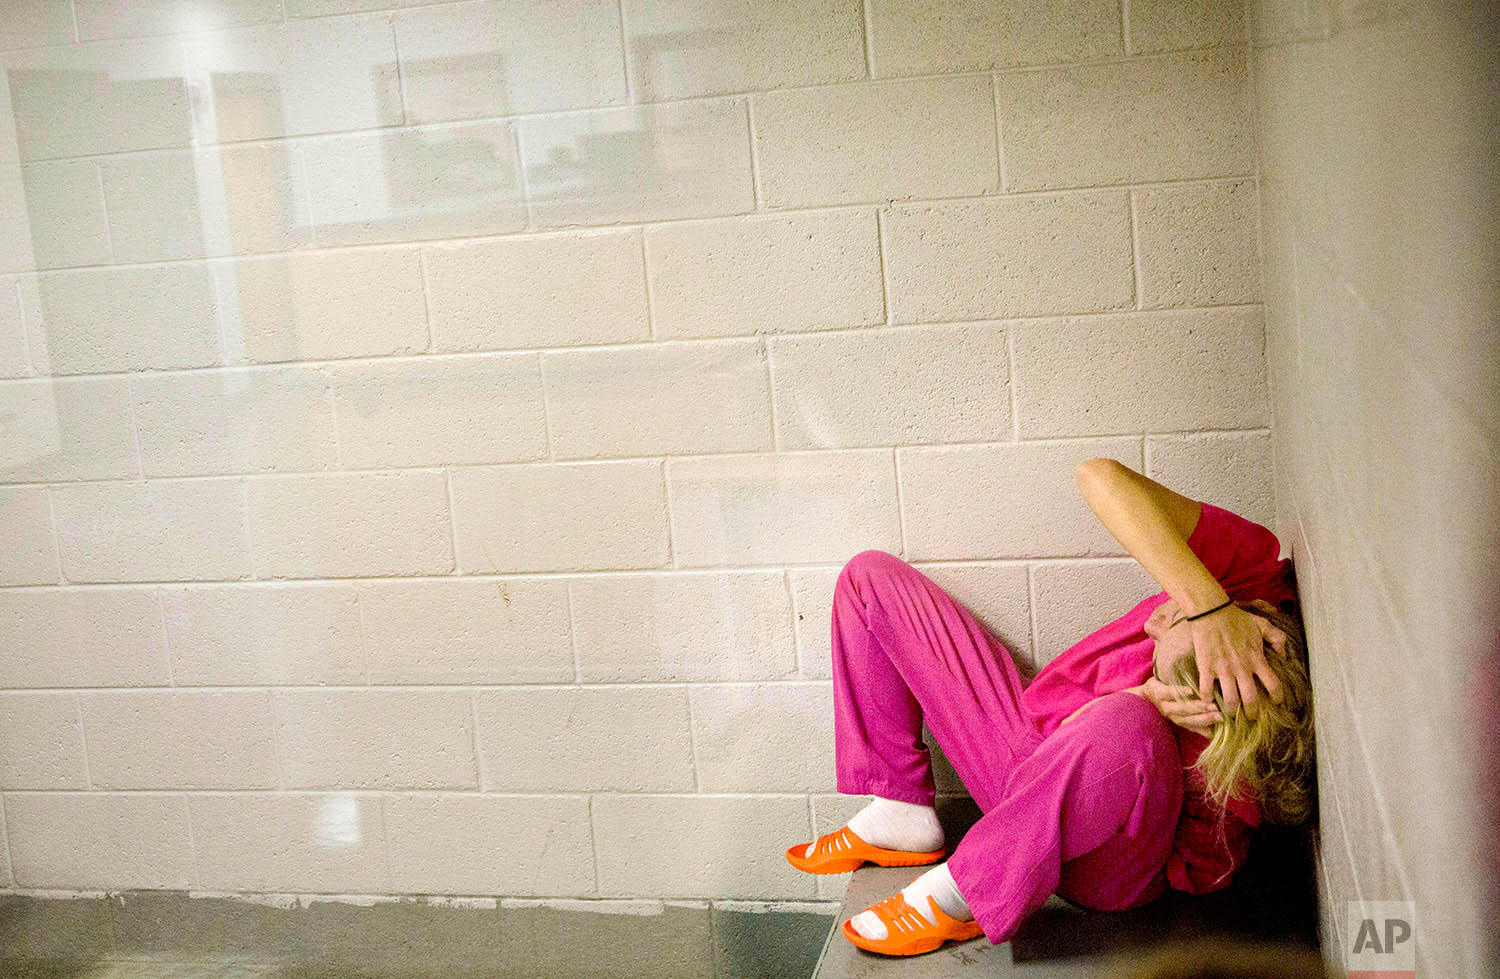  Jessica Morgan, high on methamphetamines and the opioid pain medication Opana, sits in a holding cell after being booked for drug possession at the Campbell County Jail in Jacksboro, Tenn., Monday, April 23, 2018. (AP Photo/David Goldman)    